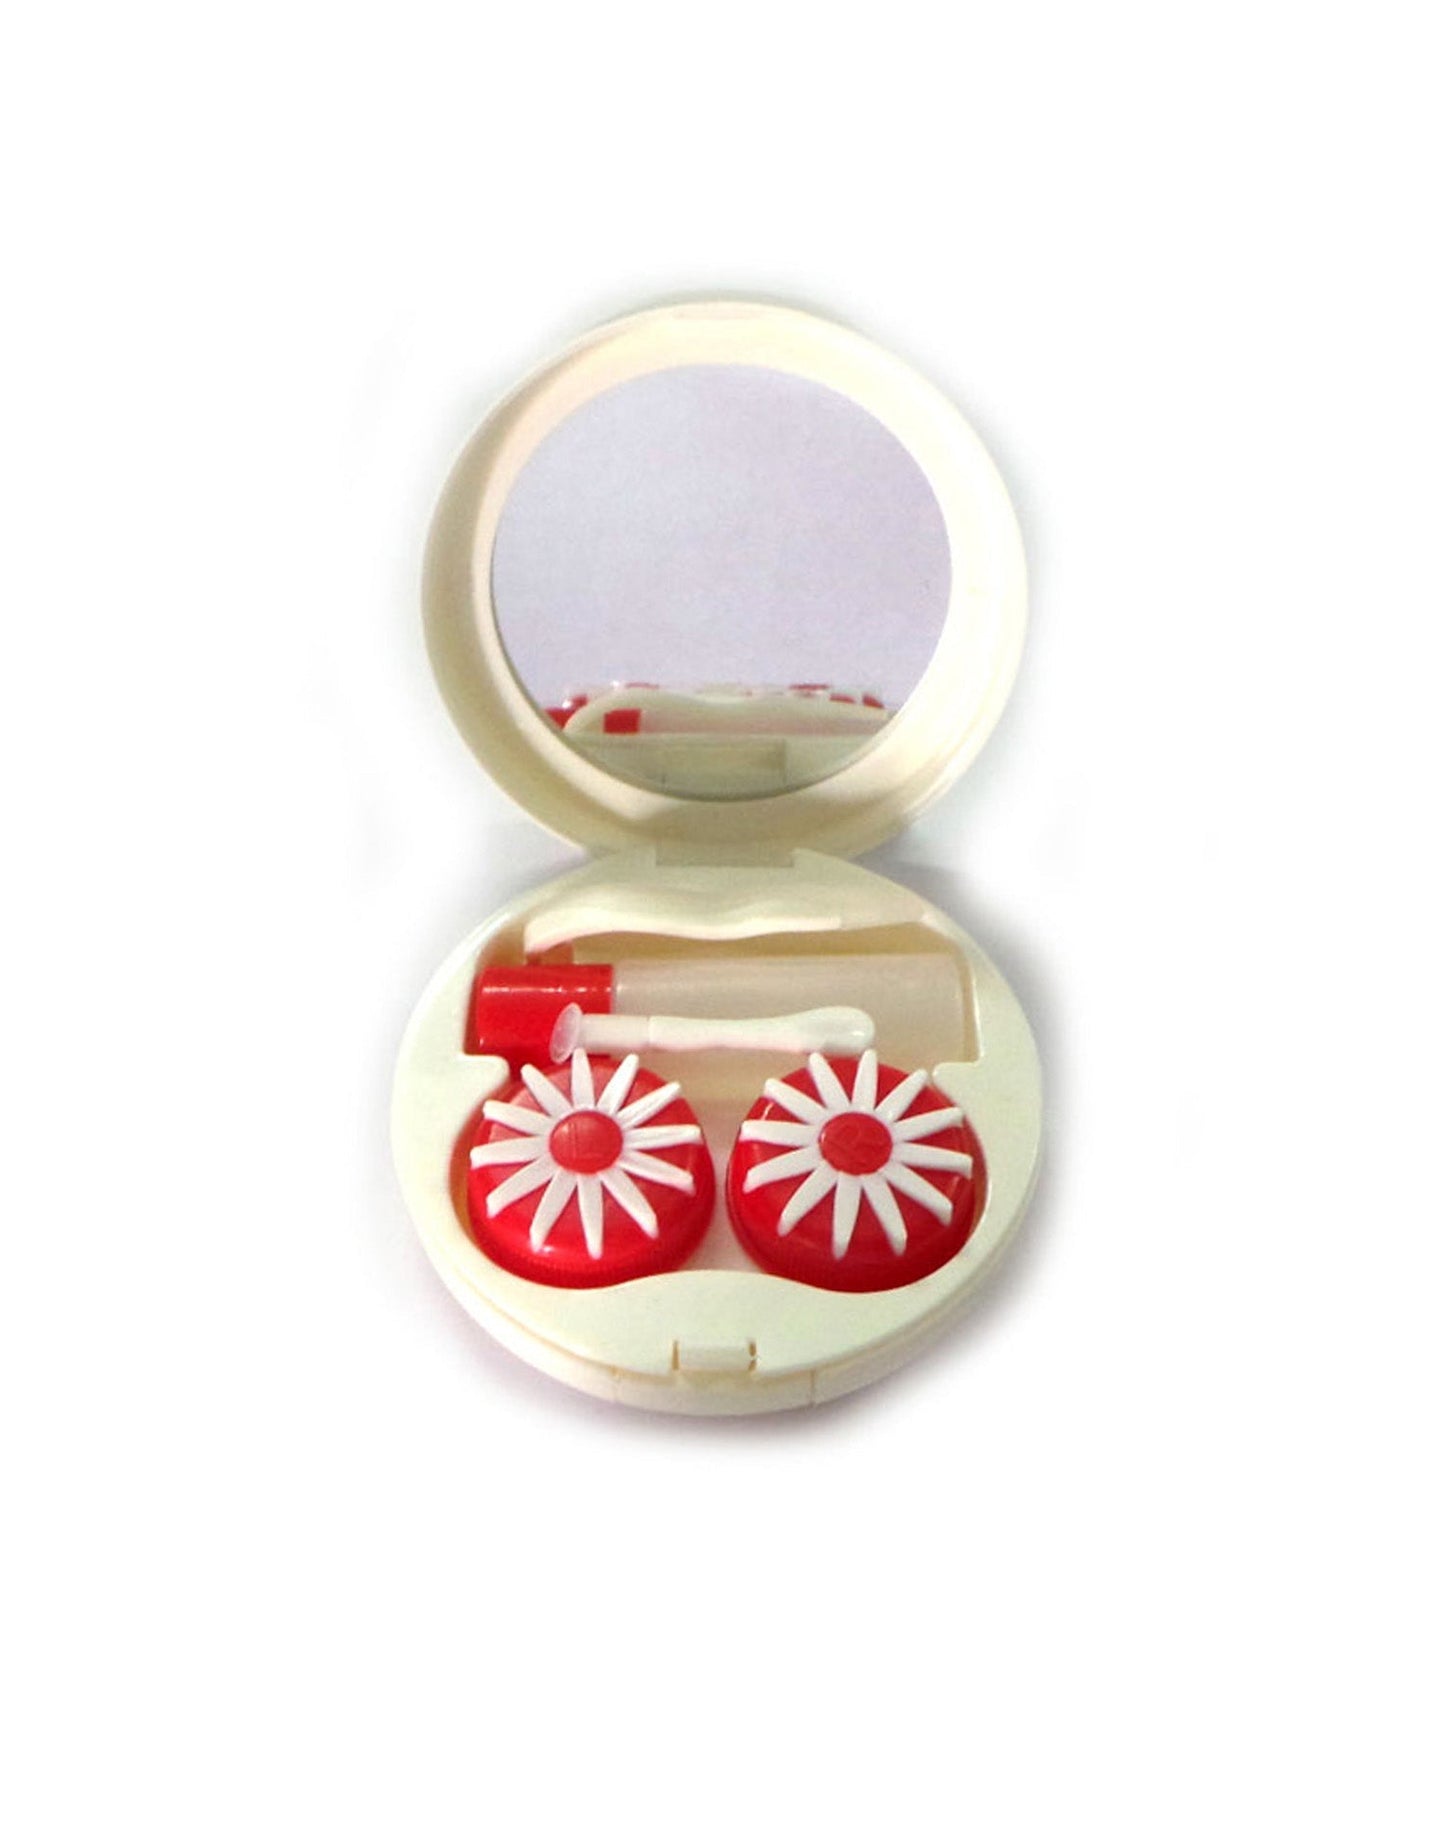 BUTTERFLY EFFECT - Designer Contact Lens Cases - A8063A-RD ARCADIO